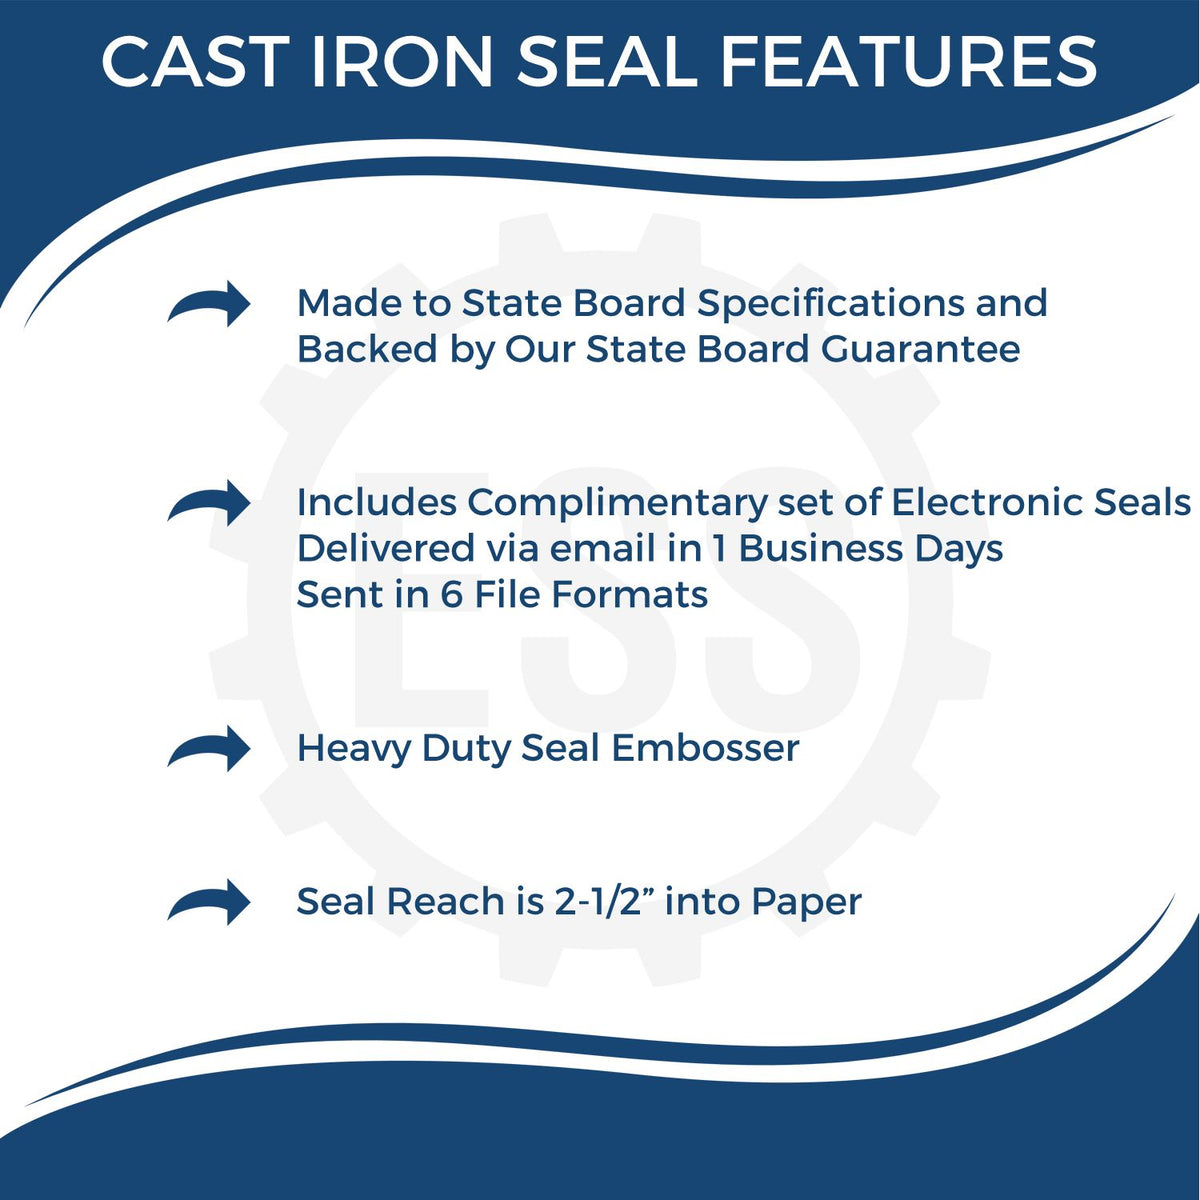 A picture of an infographic highlighting the selling points for the Heavy Duty Cast Iron New York Geologist Seal Embosser